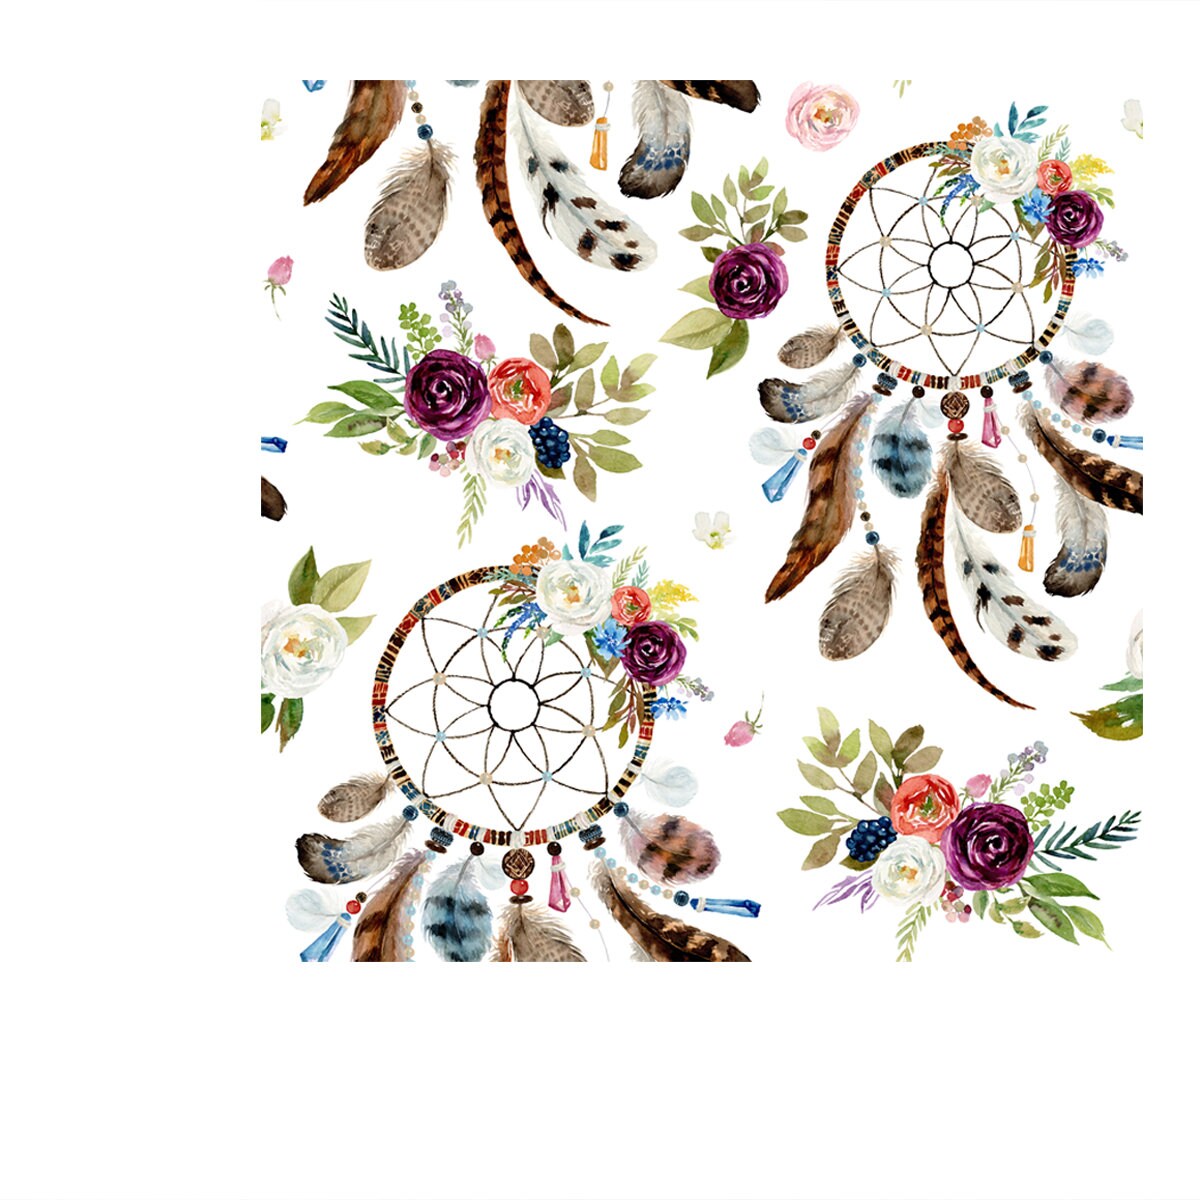 Watercolor Ethnic Boho Floral Pattern. Dreamcatchers and Flowers on White Background Wallpaper Bedroom Mural